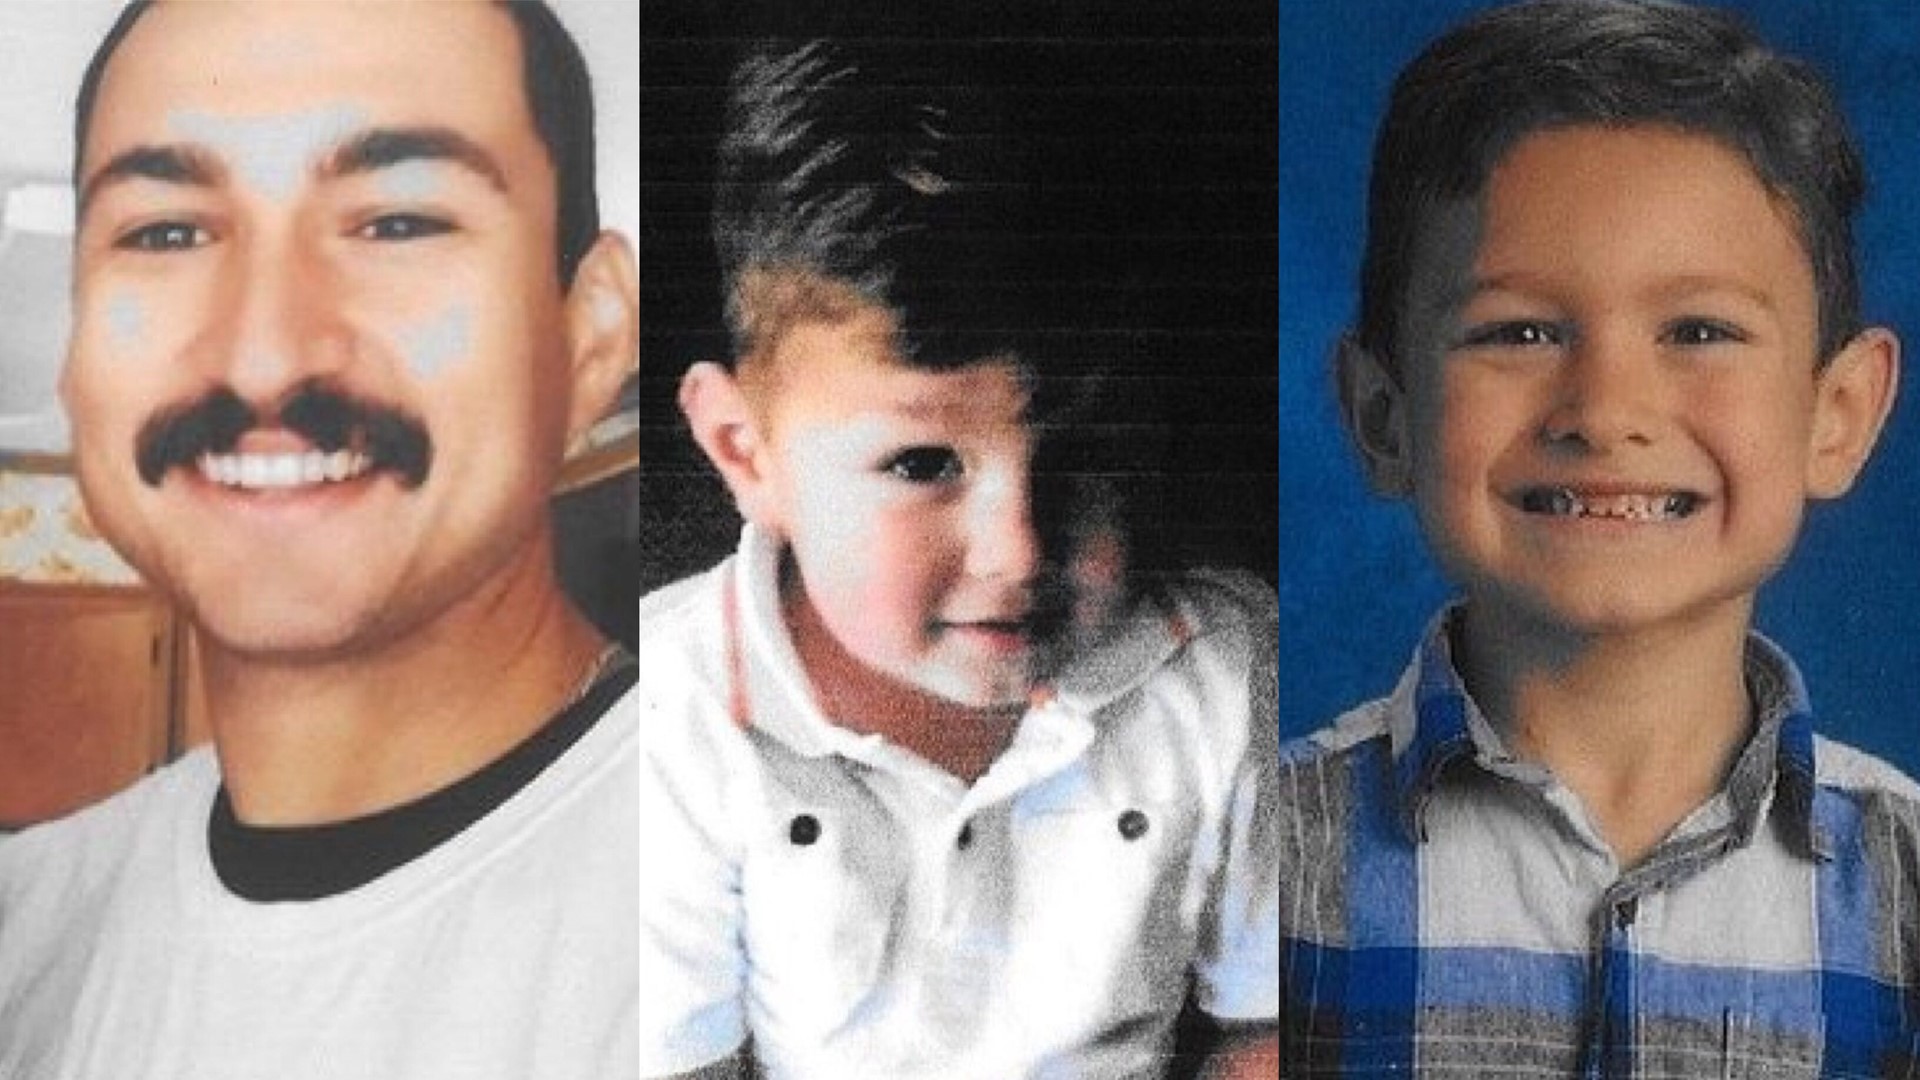 Search efforts are continuing for a missing father and two children in Butte County.